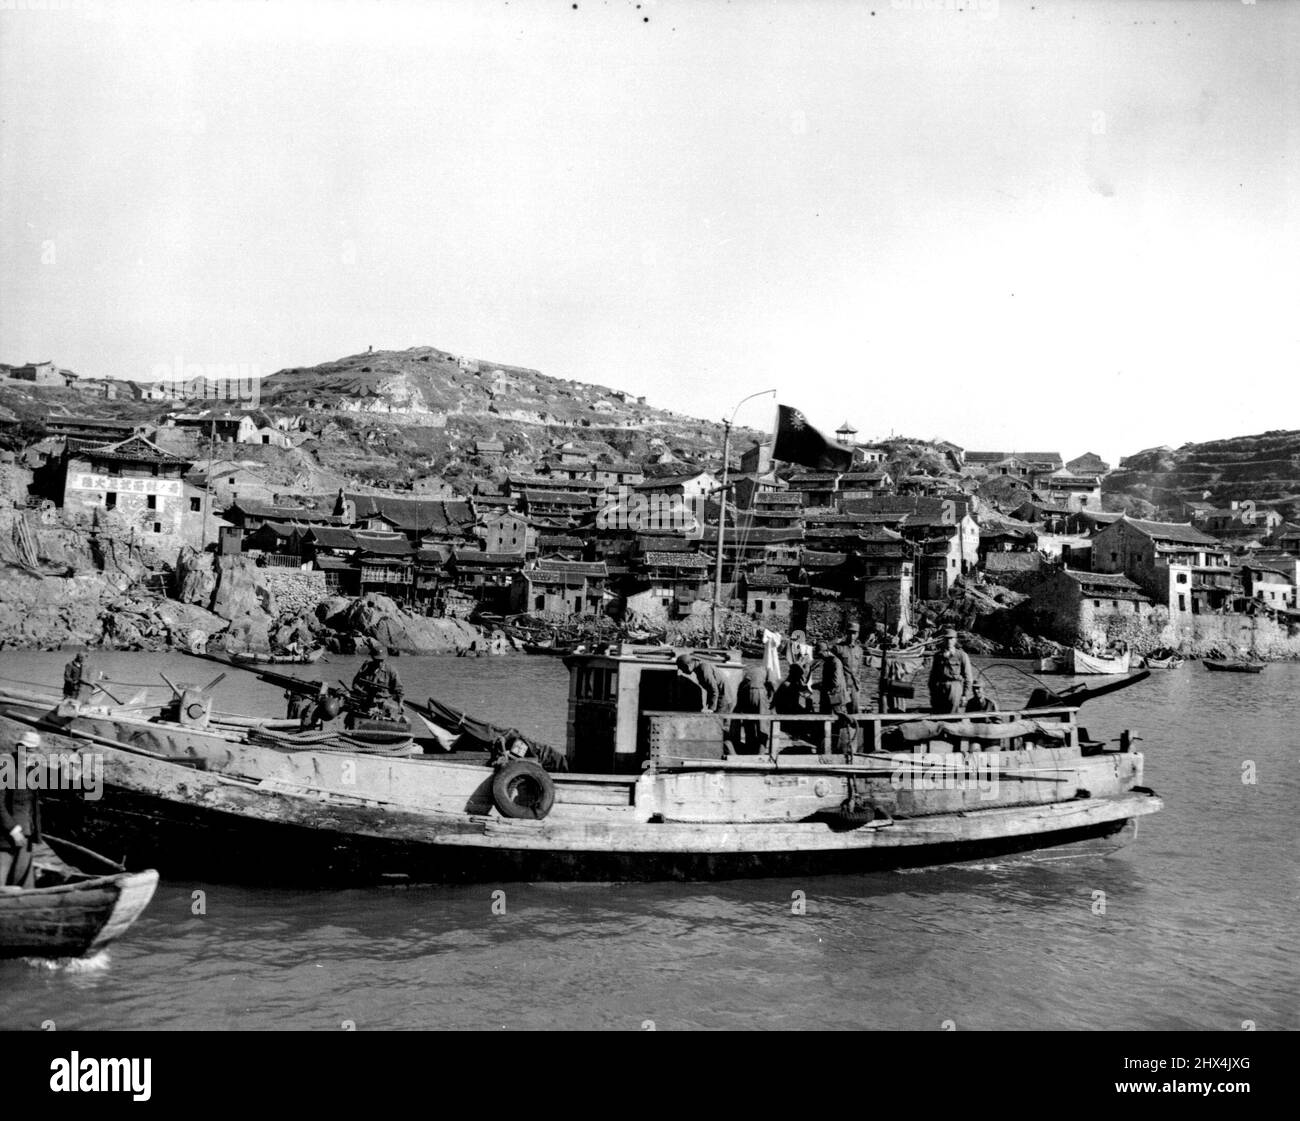 Guarding approach to Island - An armed Chinese nationalist junk rests in water off the Island of lower Tachen in the Tachen Island group. Part of village of tashatou is in background. Islands are held by Chinese nationalists and have been targets of attacks by Chinese reds. island group is only 14 miles from the Chinese mainland and about 200 miles north of the Chinese nationalist stronghold of Formosa. December 05, 1954. (Photo by Associated Press Photo). Stock Photo